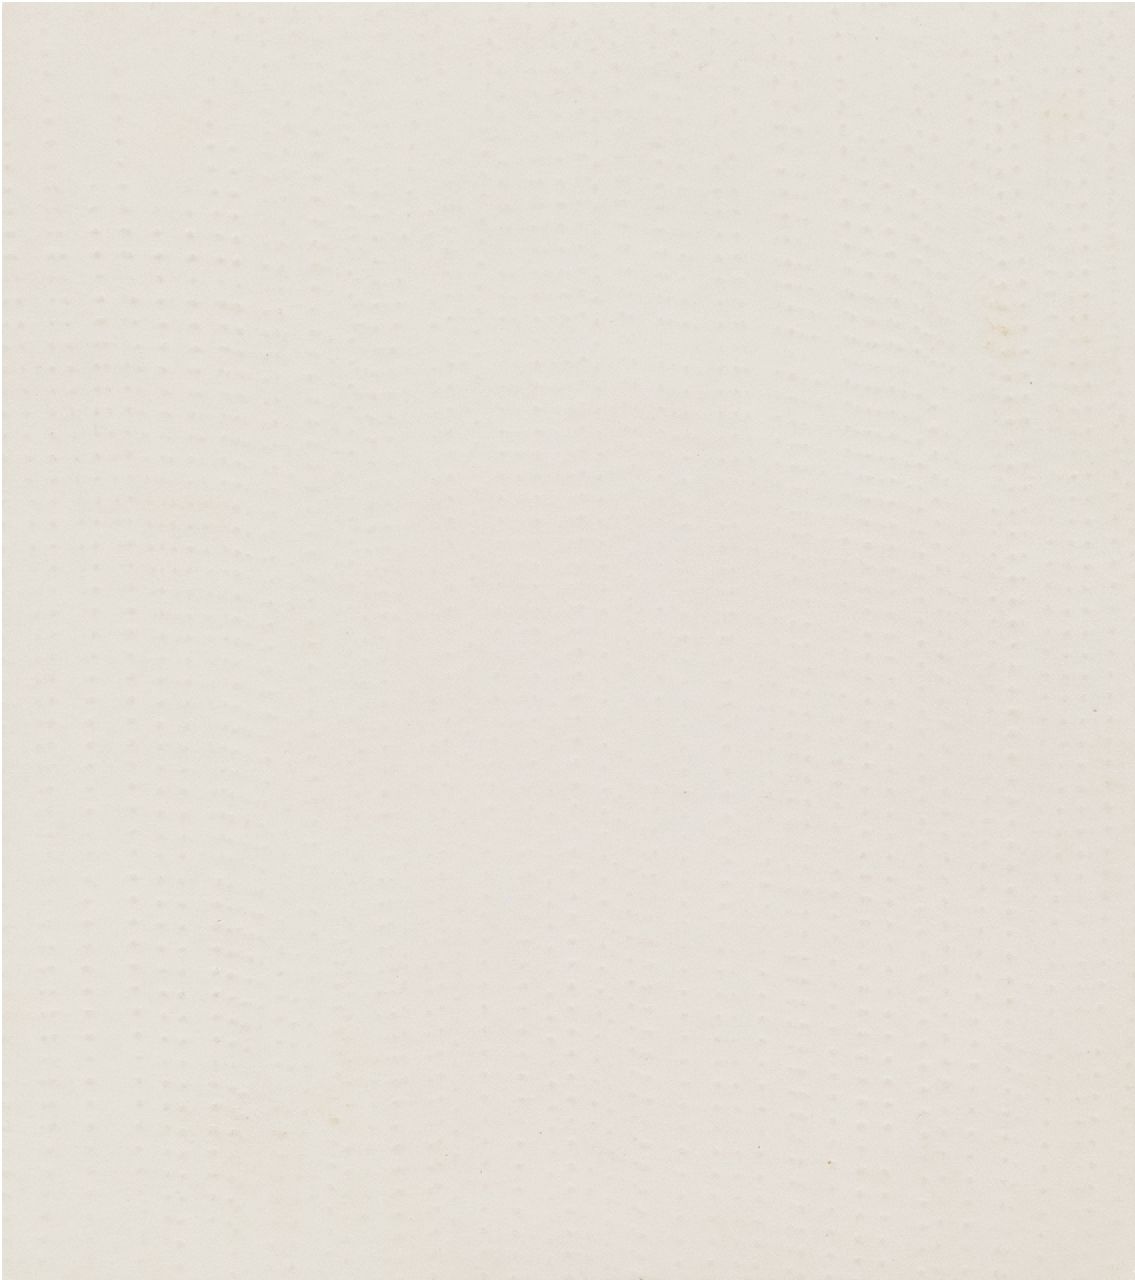 herman de vries | Untitled, reliëf on paper, 12.6 x 11.2 cm, signed on the reverse and dated on the reverse 17 II 61